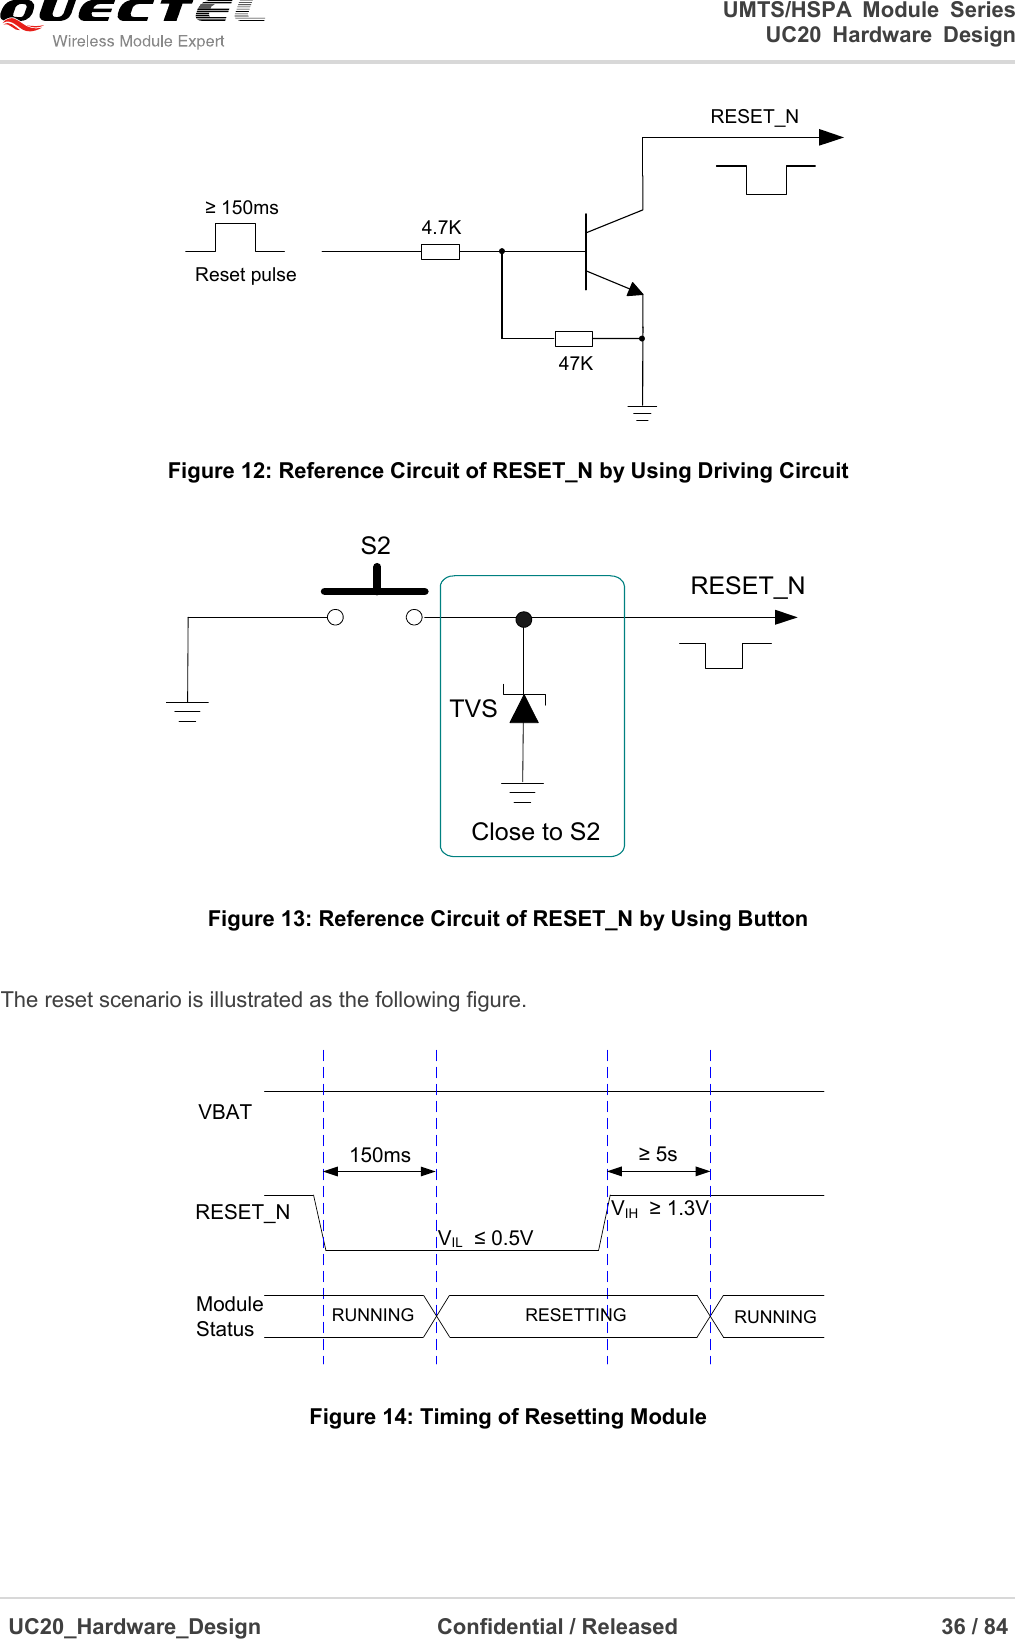                                                                                                                                               UMTS/HSPA  Module  Series                                                                 UC20  Hardware  Design  UC20_Hardware_Design                  Confidential / Released                            36 / 84     Reset pulseRESET_N4.7K47K≥ 150ms Figure 12: Reference Circuit of RESET_N by Using Driving Circuit RESET_NS2Close to S2TVS Figure 13: Reference Circuit of RESET_N by Using Button  The reset scenario is illustrated as the following figure. VIL  ≤ 0.5VVIH  ≥ 1.3VVBAT150msRESETTINGModule Status RUNNINGRESET_NRUNNING≥ 5s Figure 14: Timing of Resetting Module   